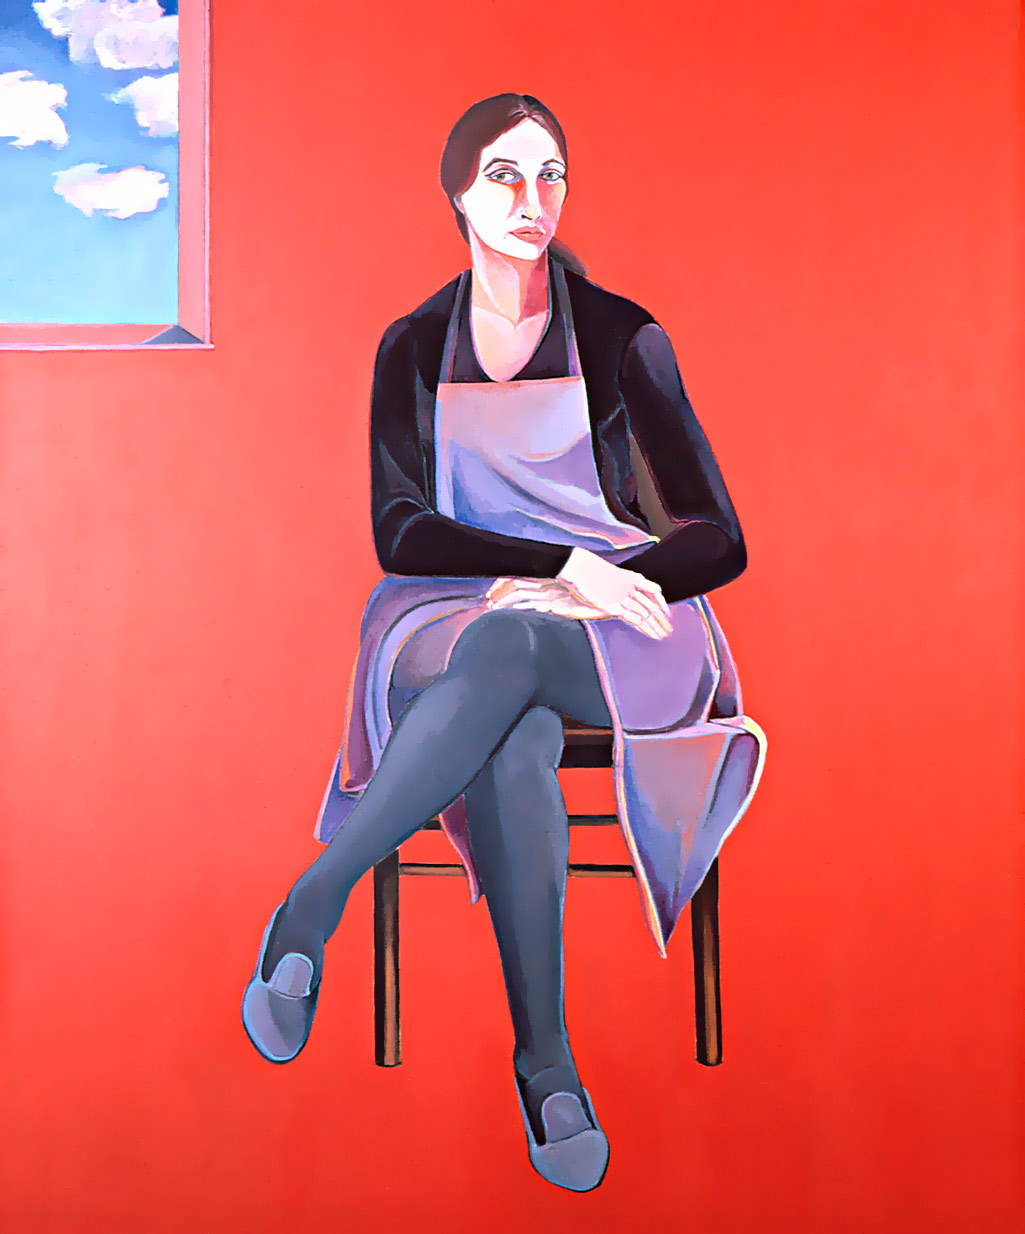 Self Portrait Red Space by Ethel Fisher, 1968, oil on linen, 55 x 45 inches, twentieth century figure painting.